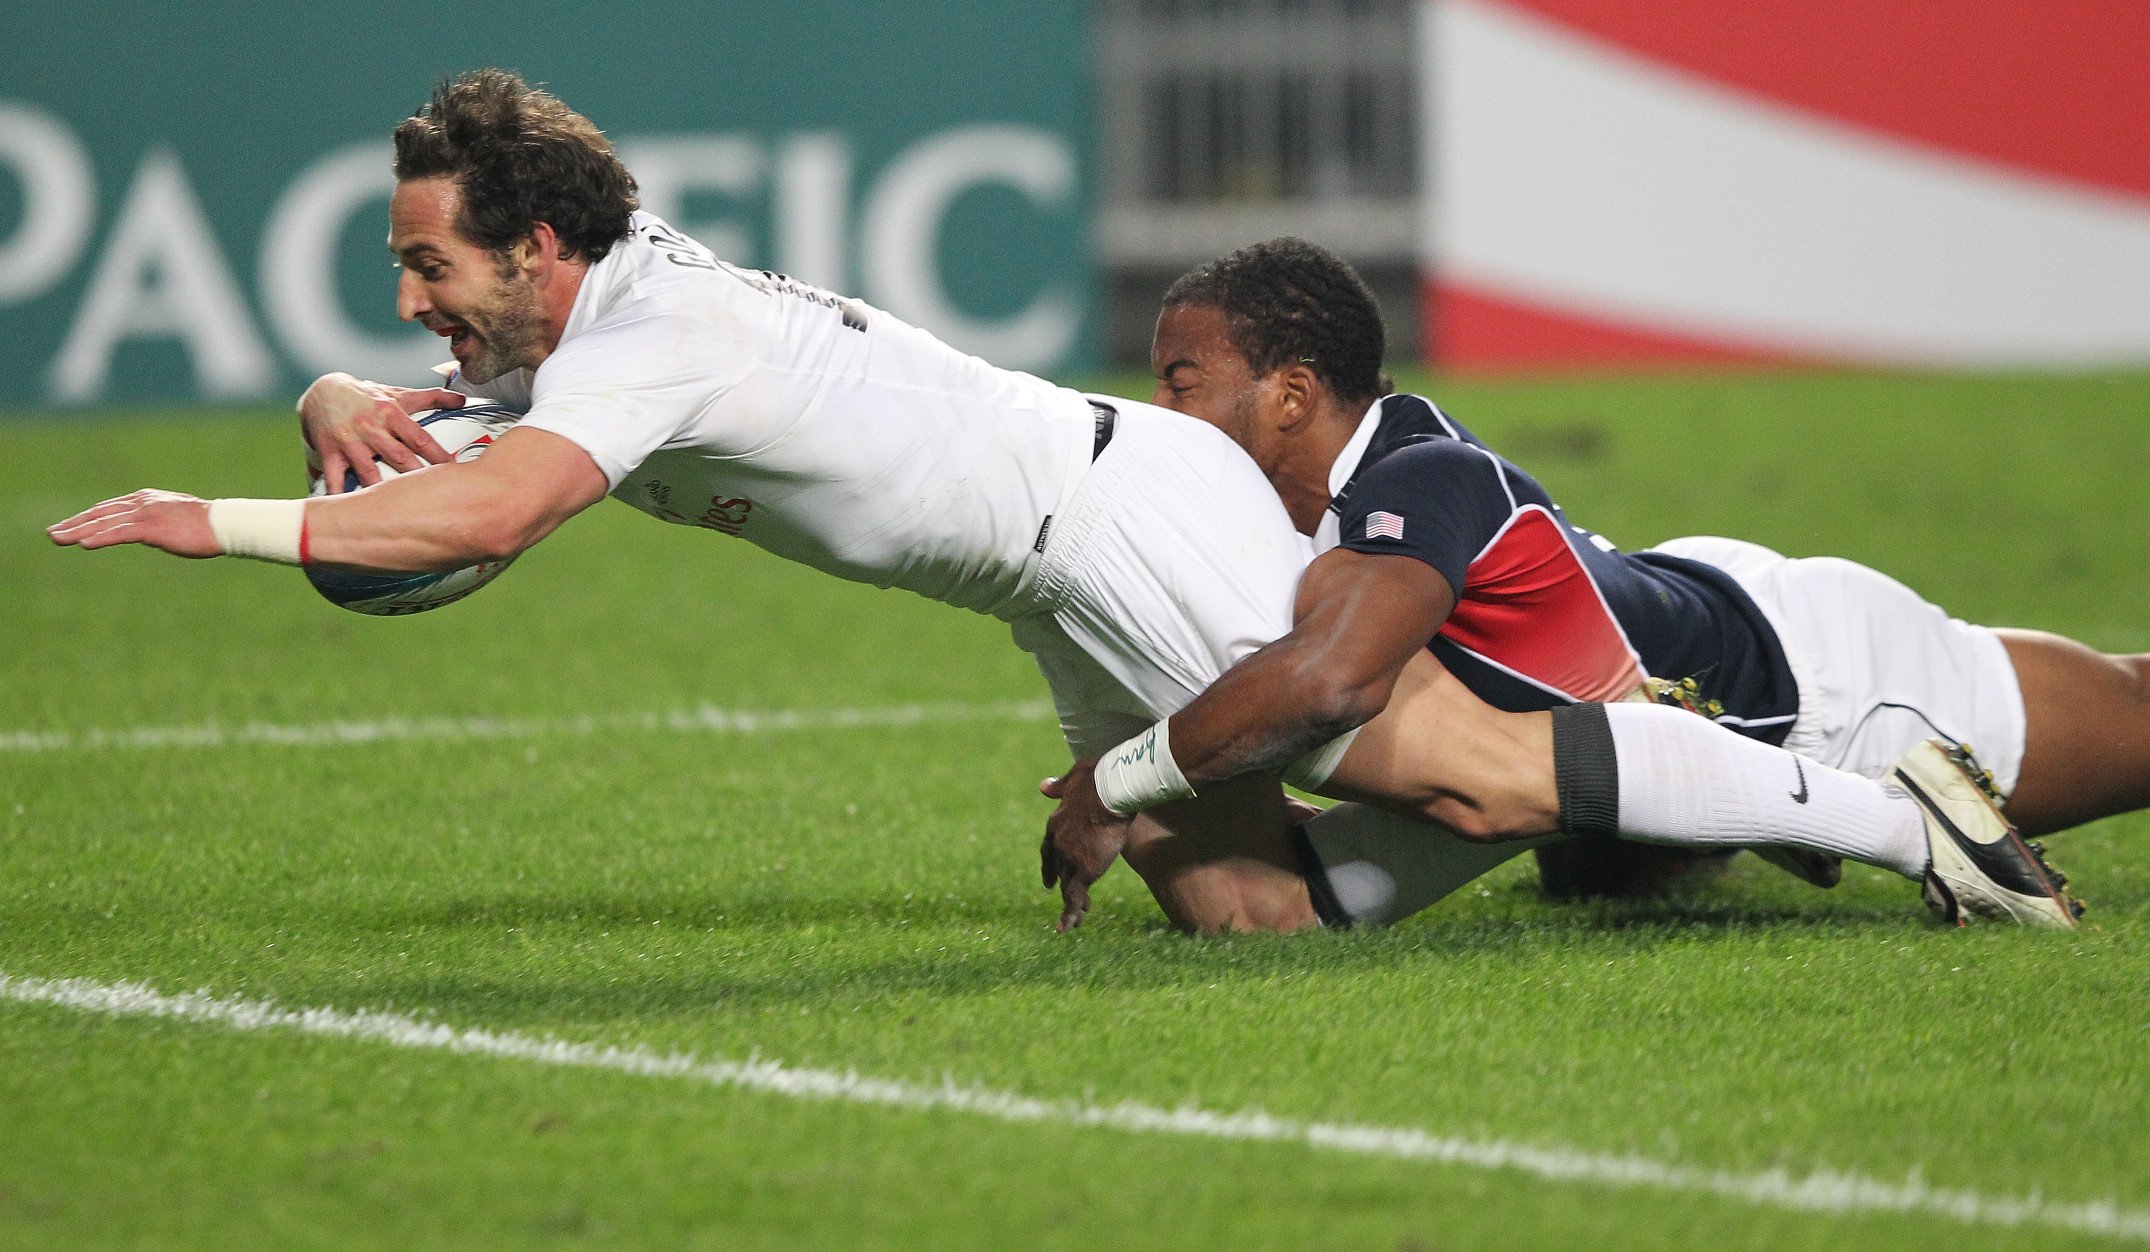 Ben Gollings helped England win the Hong Kong Sevens four times during 10 straight appearances from 2002 to 2011. Photo: K.Y. Cheng